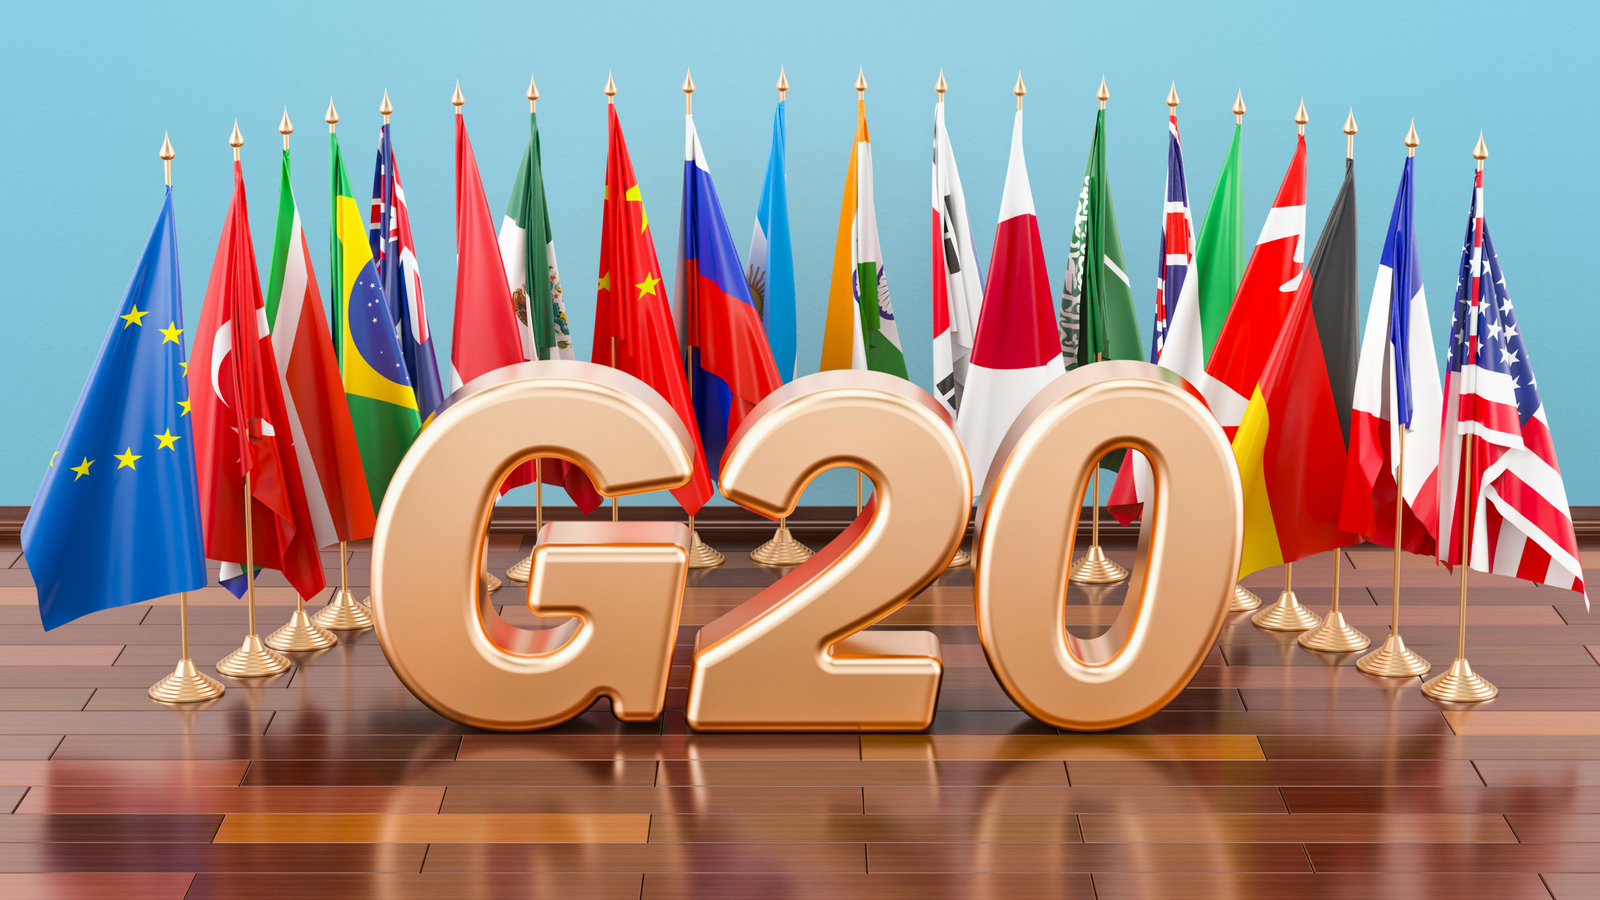 cryptocurrency regulation g20 financial action task force